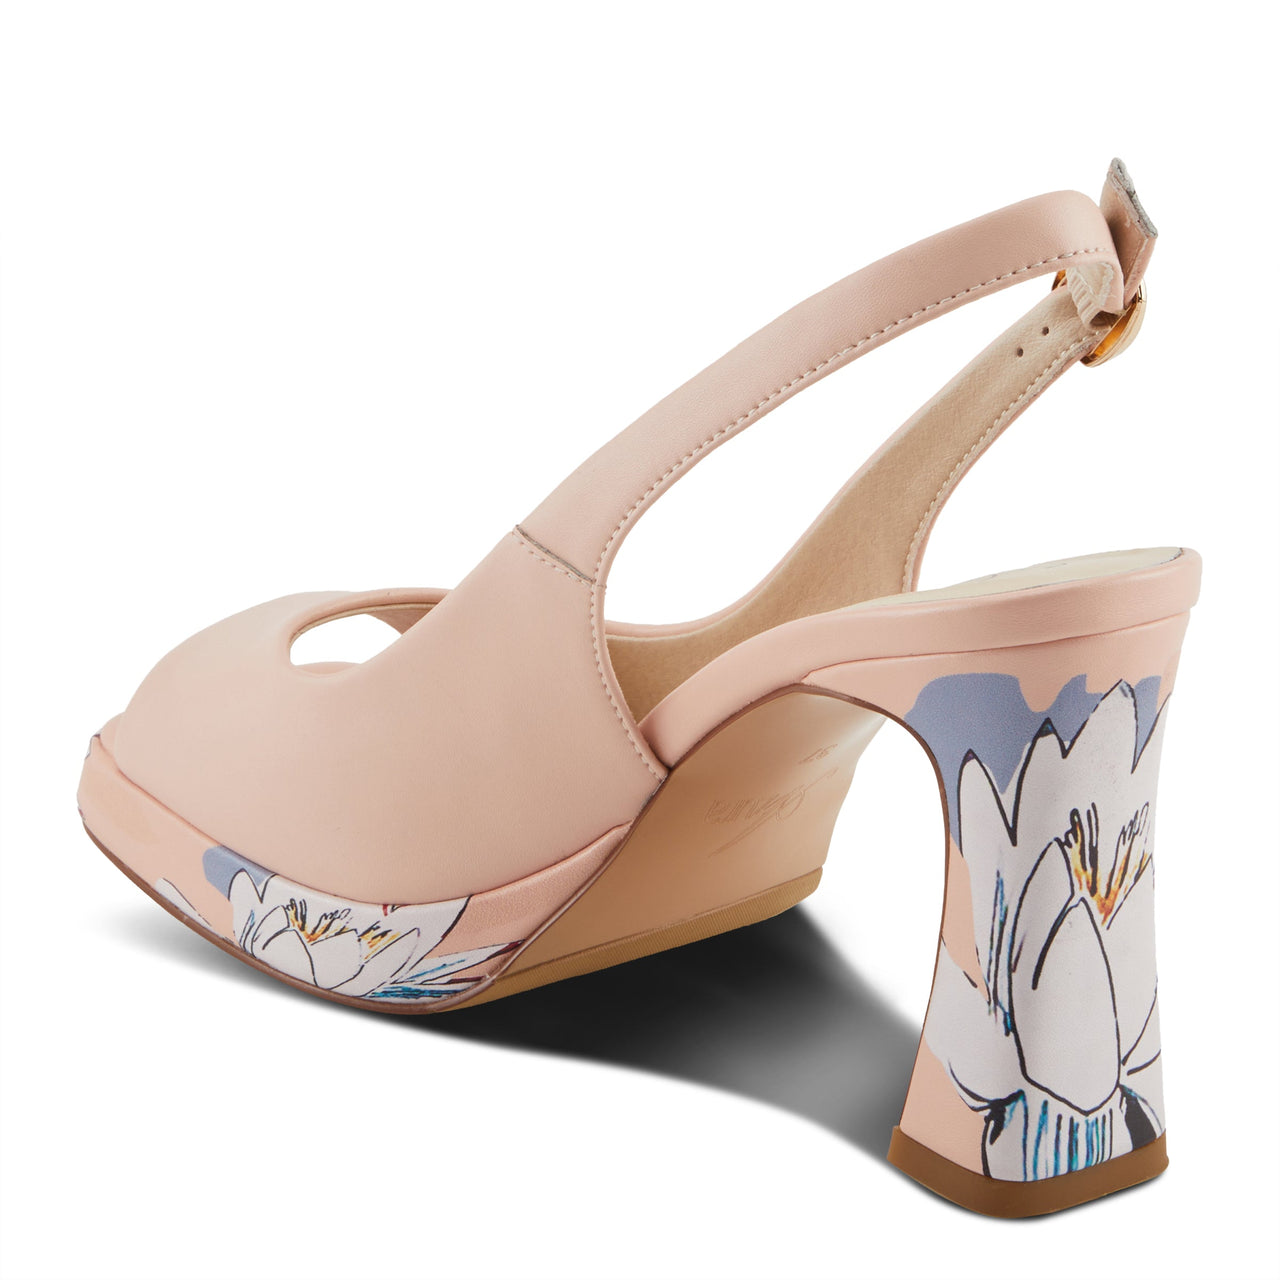 Beautiful and comfortable Spring Step Shoes Azura Stature Sandals in a soft, neutral tan color with intricate detailing and a supportive, cushioned footbed